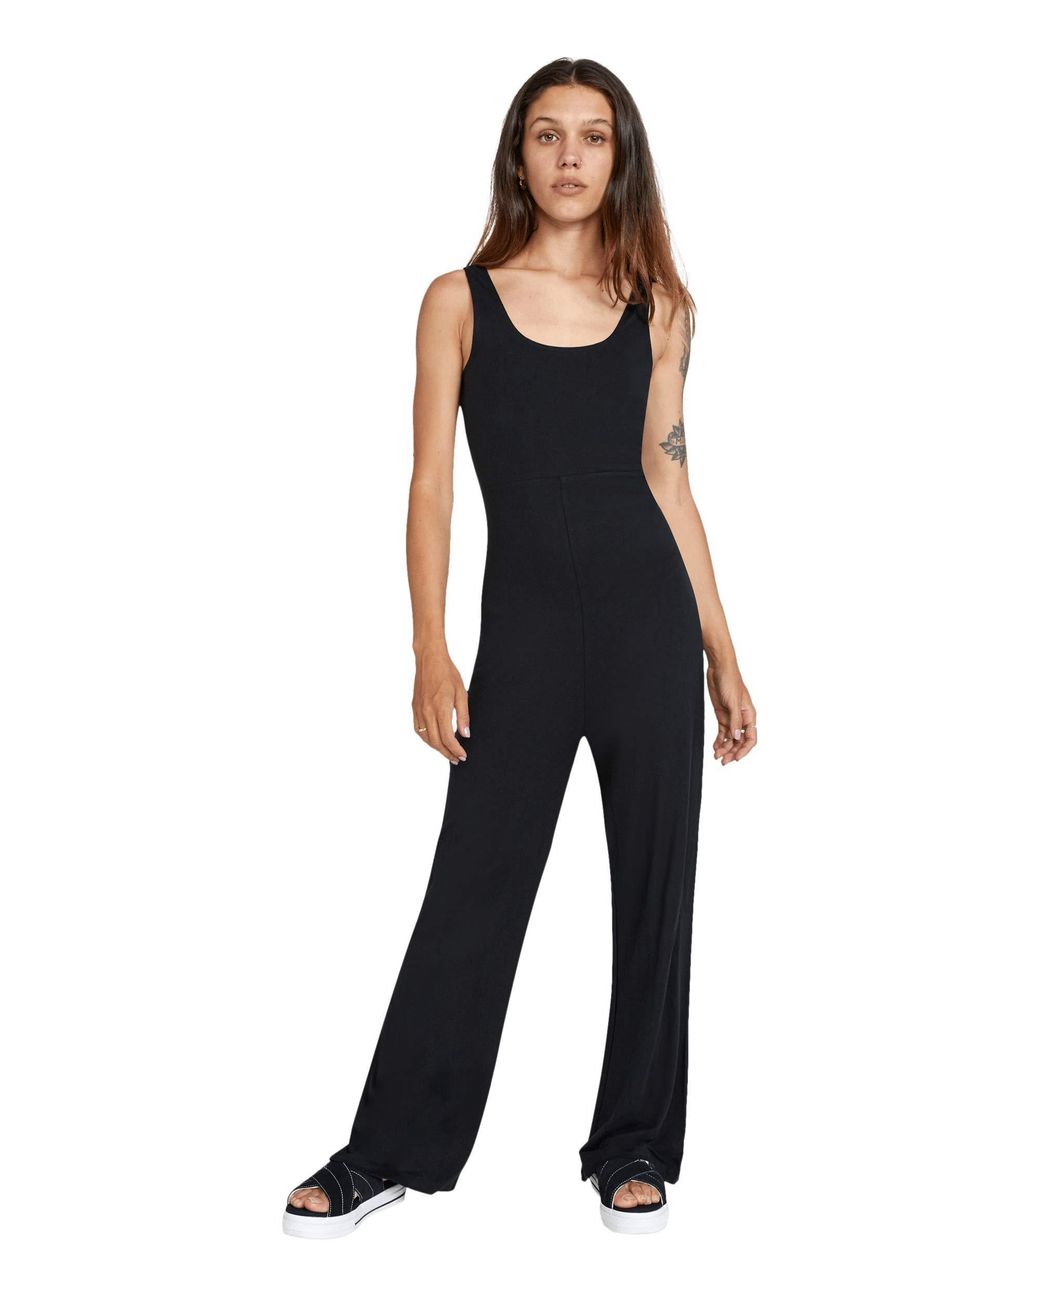 RVCA Sunday Collection One Piece Stretch Bodysuit Jumpsuit in Black | Lyst